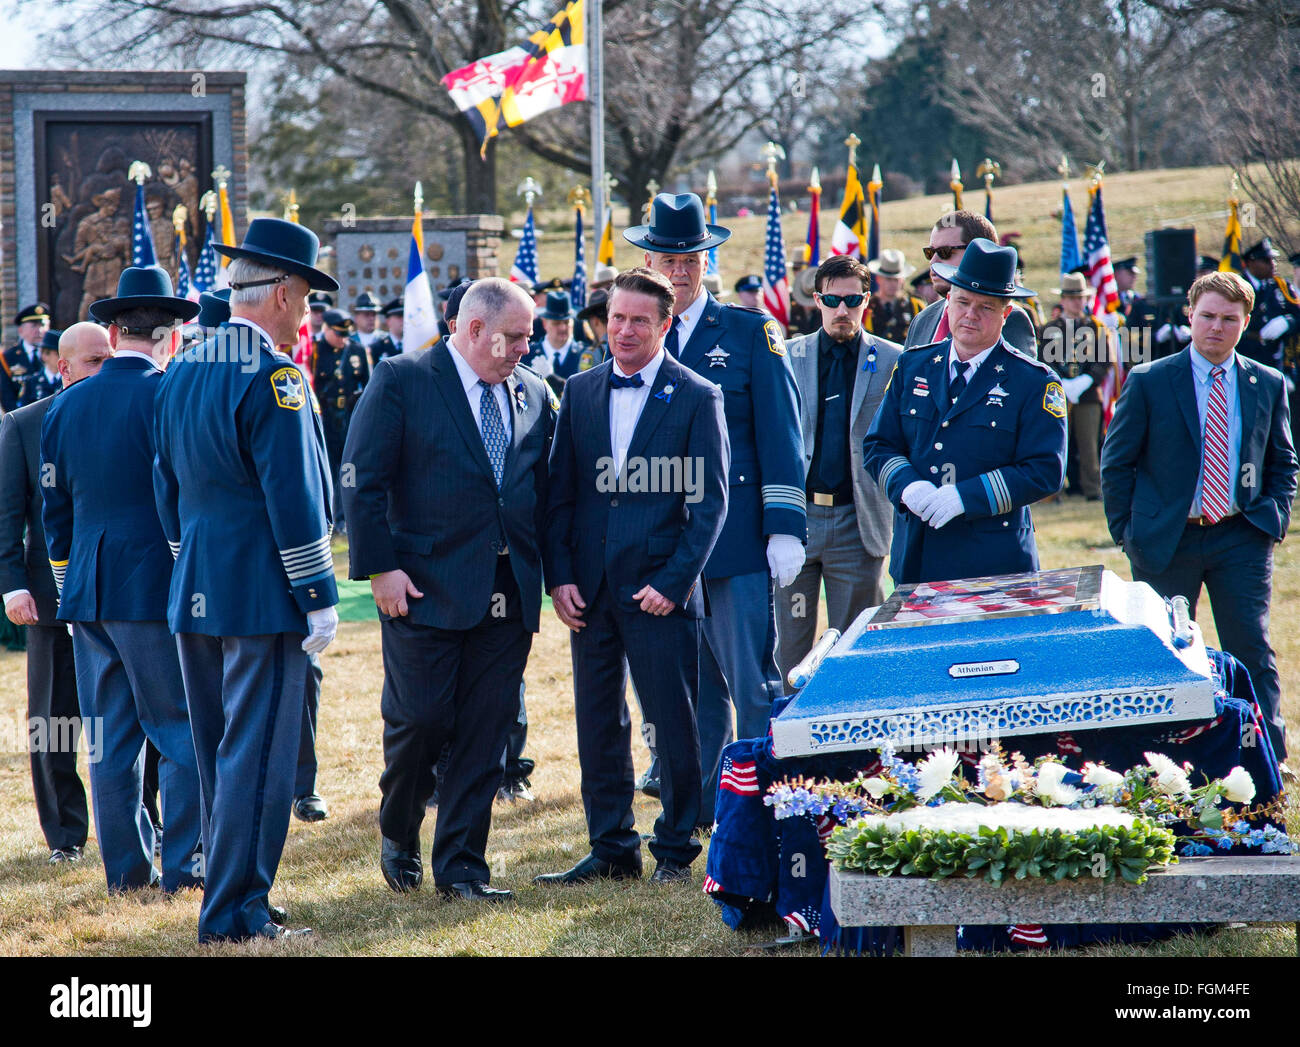 Feb. 20, 2016 - Timonium, Maryland, U.S. - February 20, 2016 : Maryland Governor Larry Hogan, 3rd from left, talks with Harford County Executive Barry Glassman as they view a specially made burial vault top before the funeral for Harford County Deputy First Class Mark Logsdon at Dulaney Valley Memorial Gardens in Timonium, Maryland. This was the second of two funeral for the deputies killed on February 10th in an incident that started at a Panera bread location in Abingdon, Maryland. These were the first police deaths by gunfire for the Harford County Sheriff's Office since 1899. Scott Serio/E Stock Photo